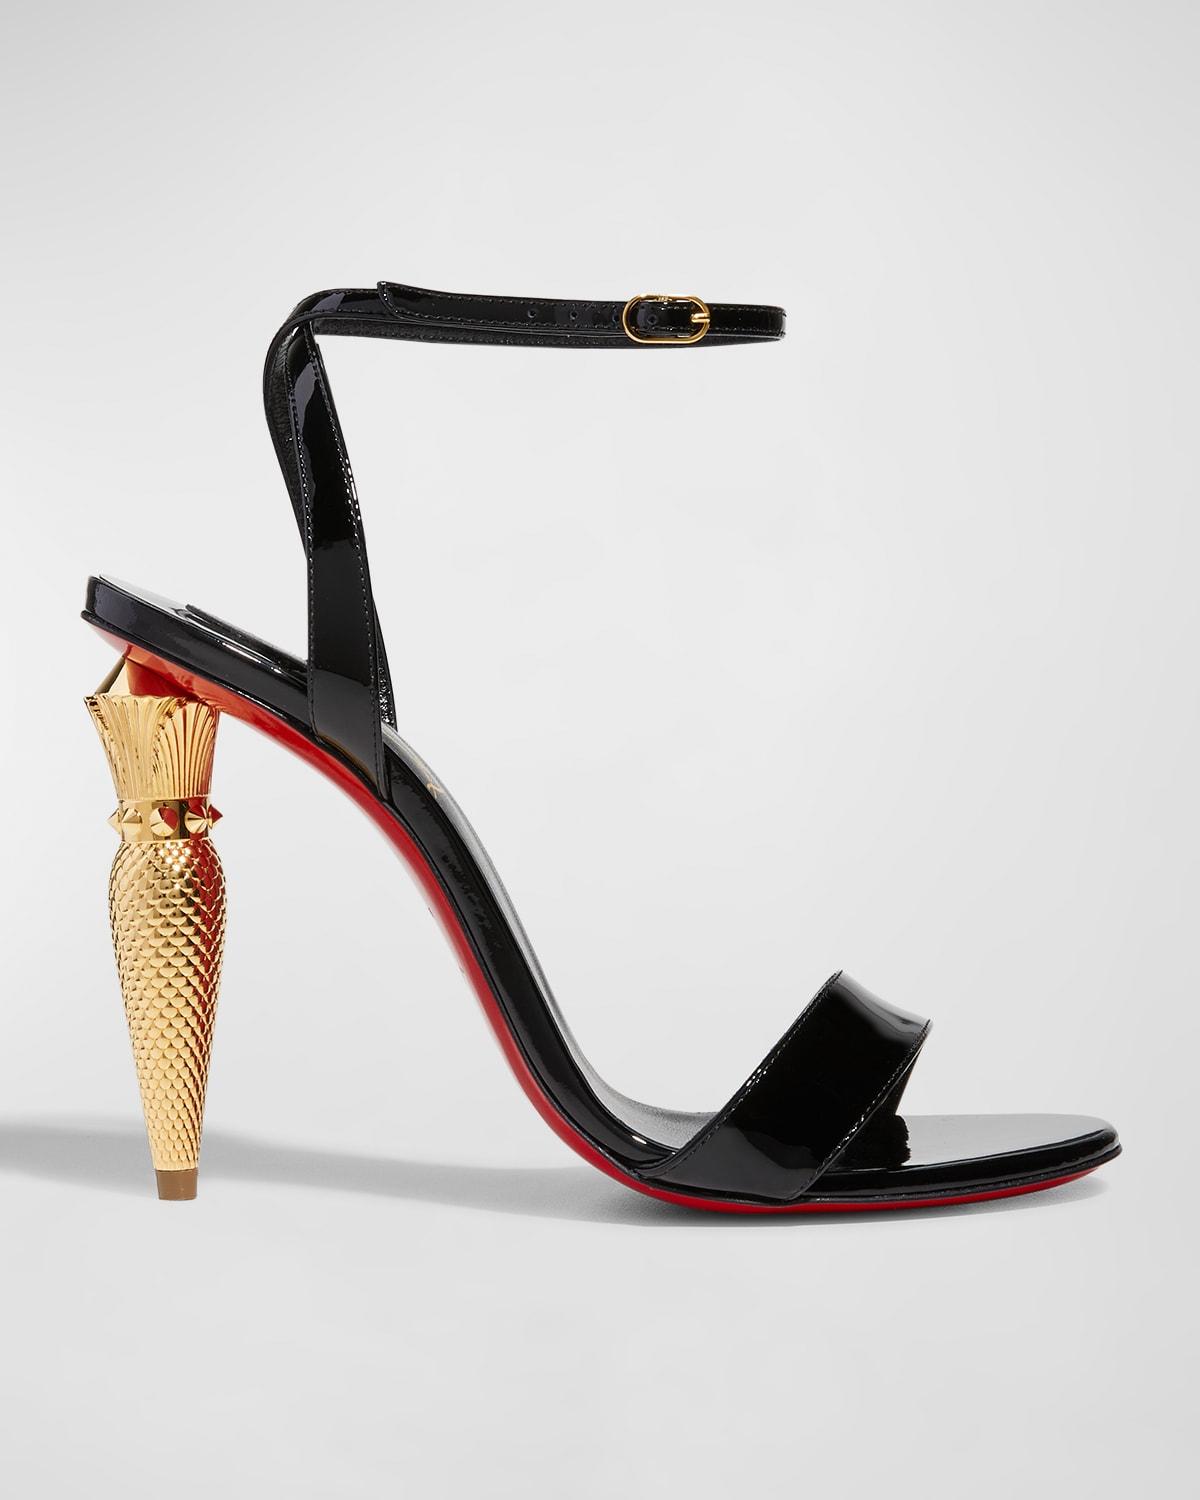 Christian Louboutin Lip Queen Patent Red Sole Sandals in Black | Lyst